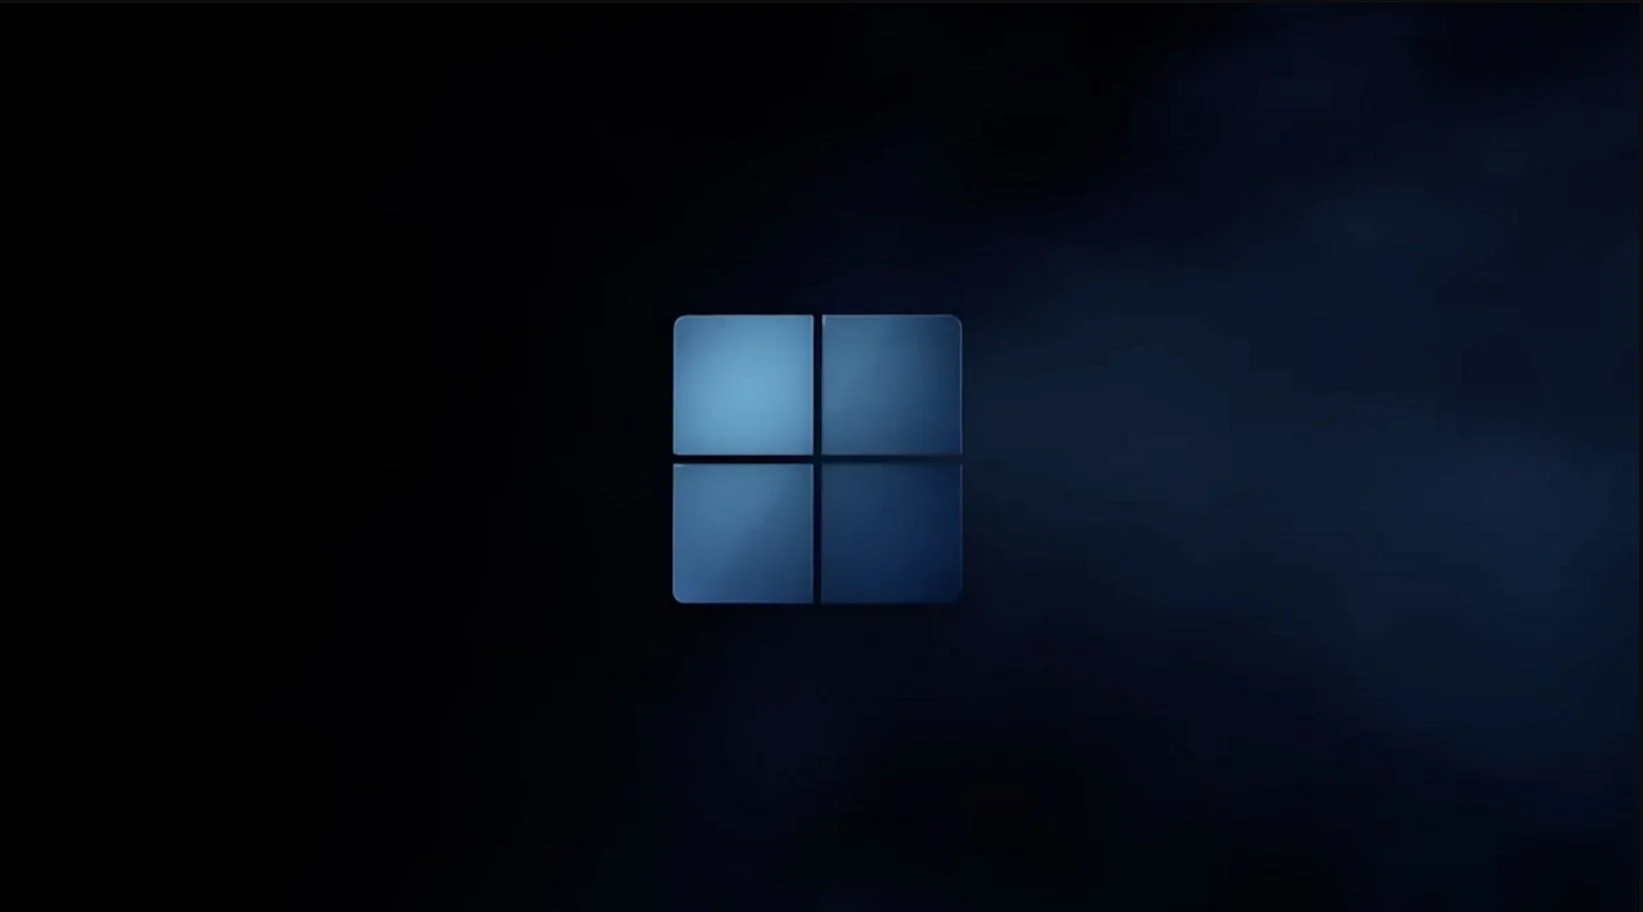 How to Install Windows 10?